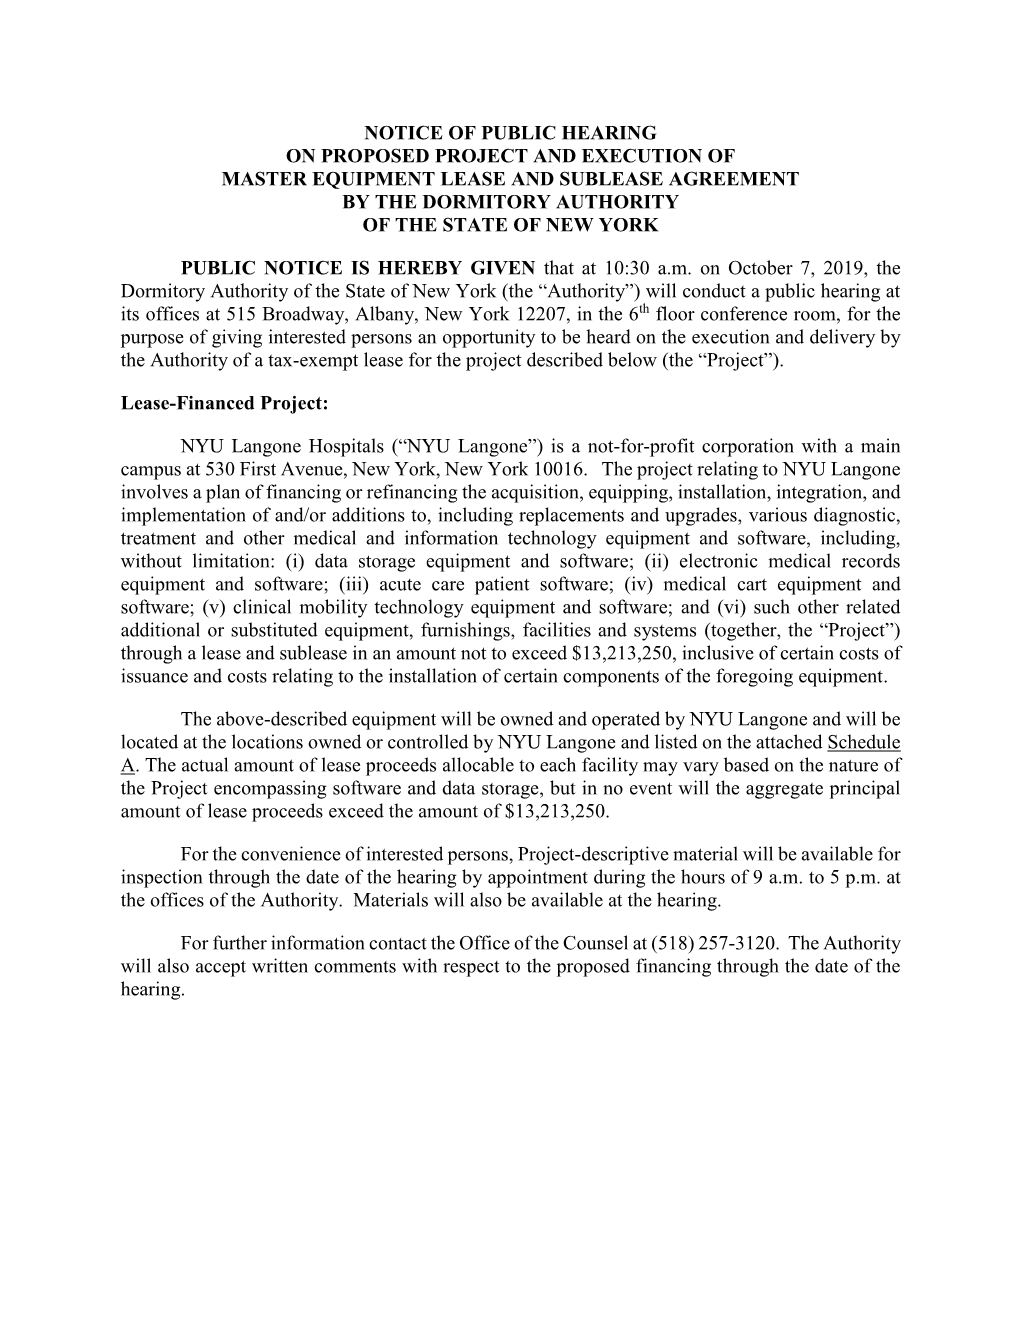 Notice of Public Hearing on Proposed Project and Execution of Master Equipment Lease and Sublease Agreement by the Dormitory Authority of the State of New York